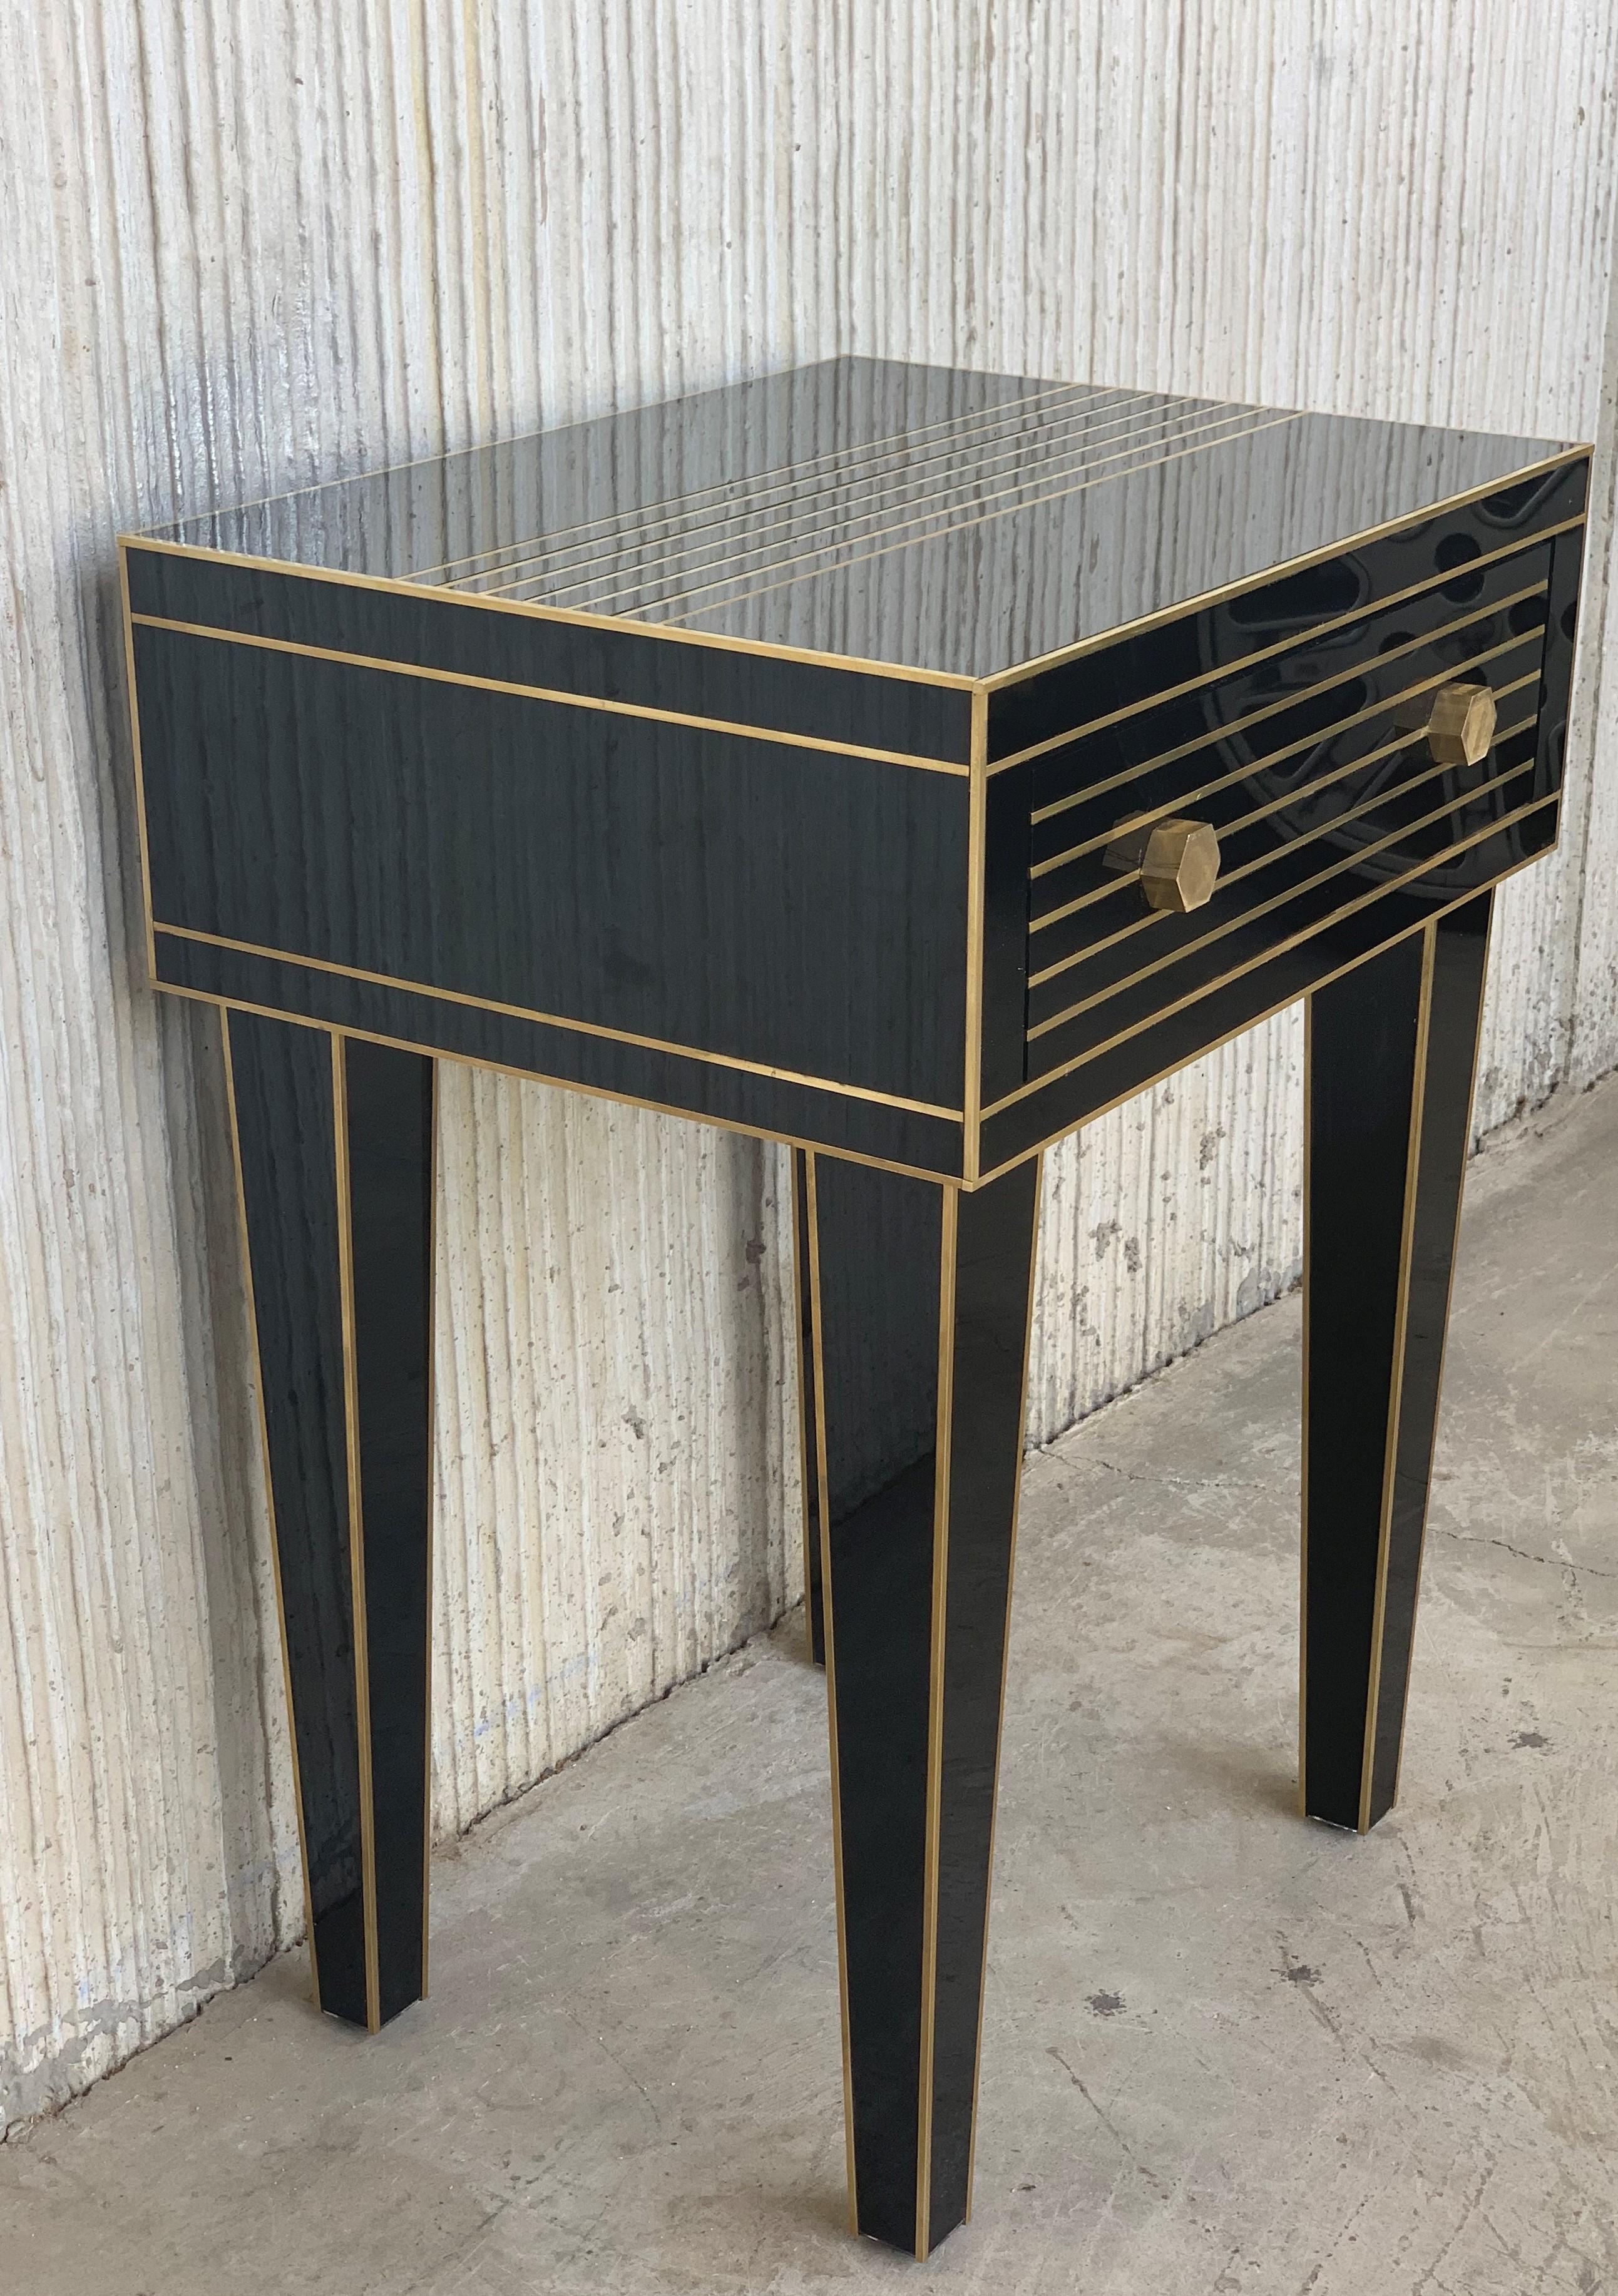 New pair of mirrored nightstands in black mirror and chrome.
Beautiful pair of nightstands with mirrored finished drawers.
Brass handle.

Price per item.